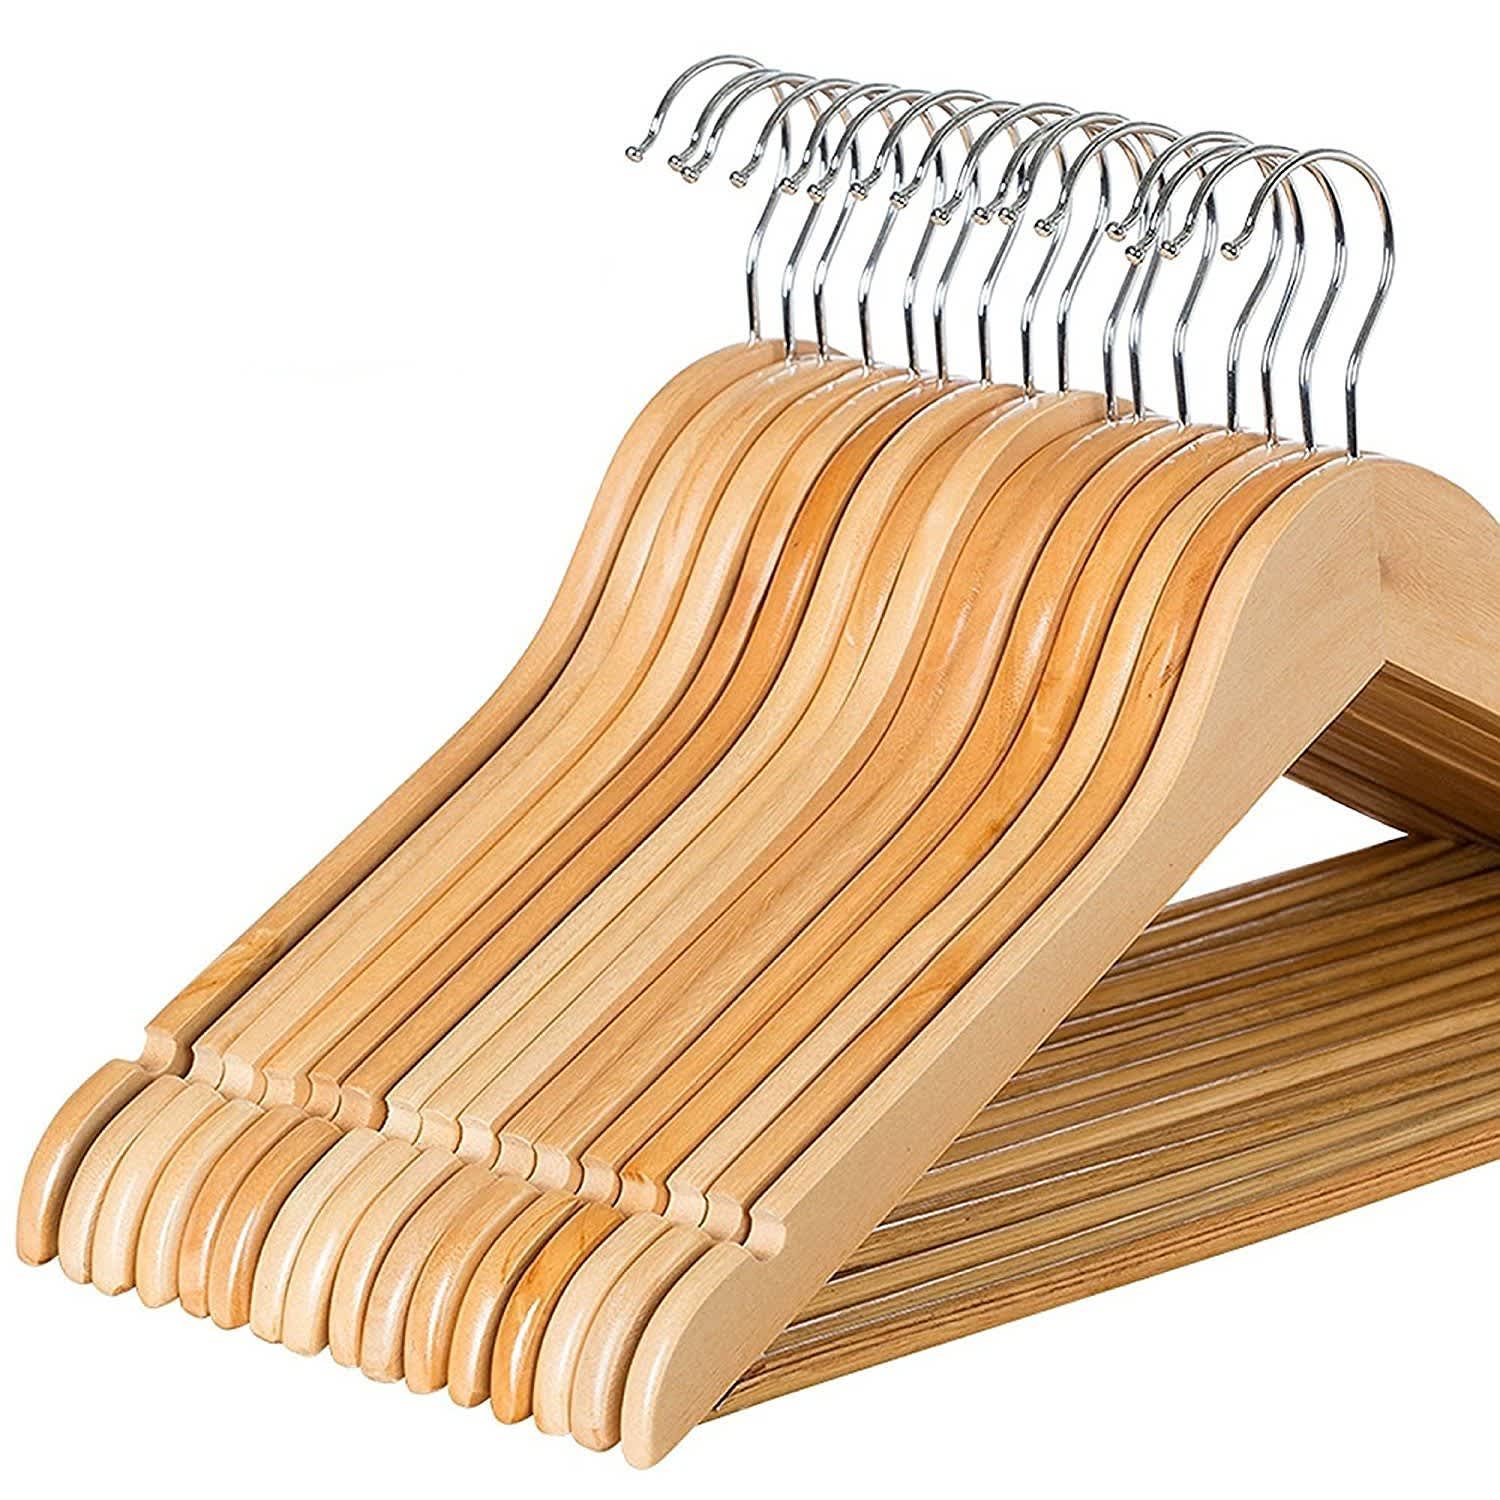 Cherry Pack of 20 Premium Quality Solid Wooden Shirt Hangers 